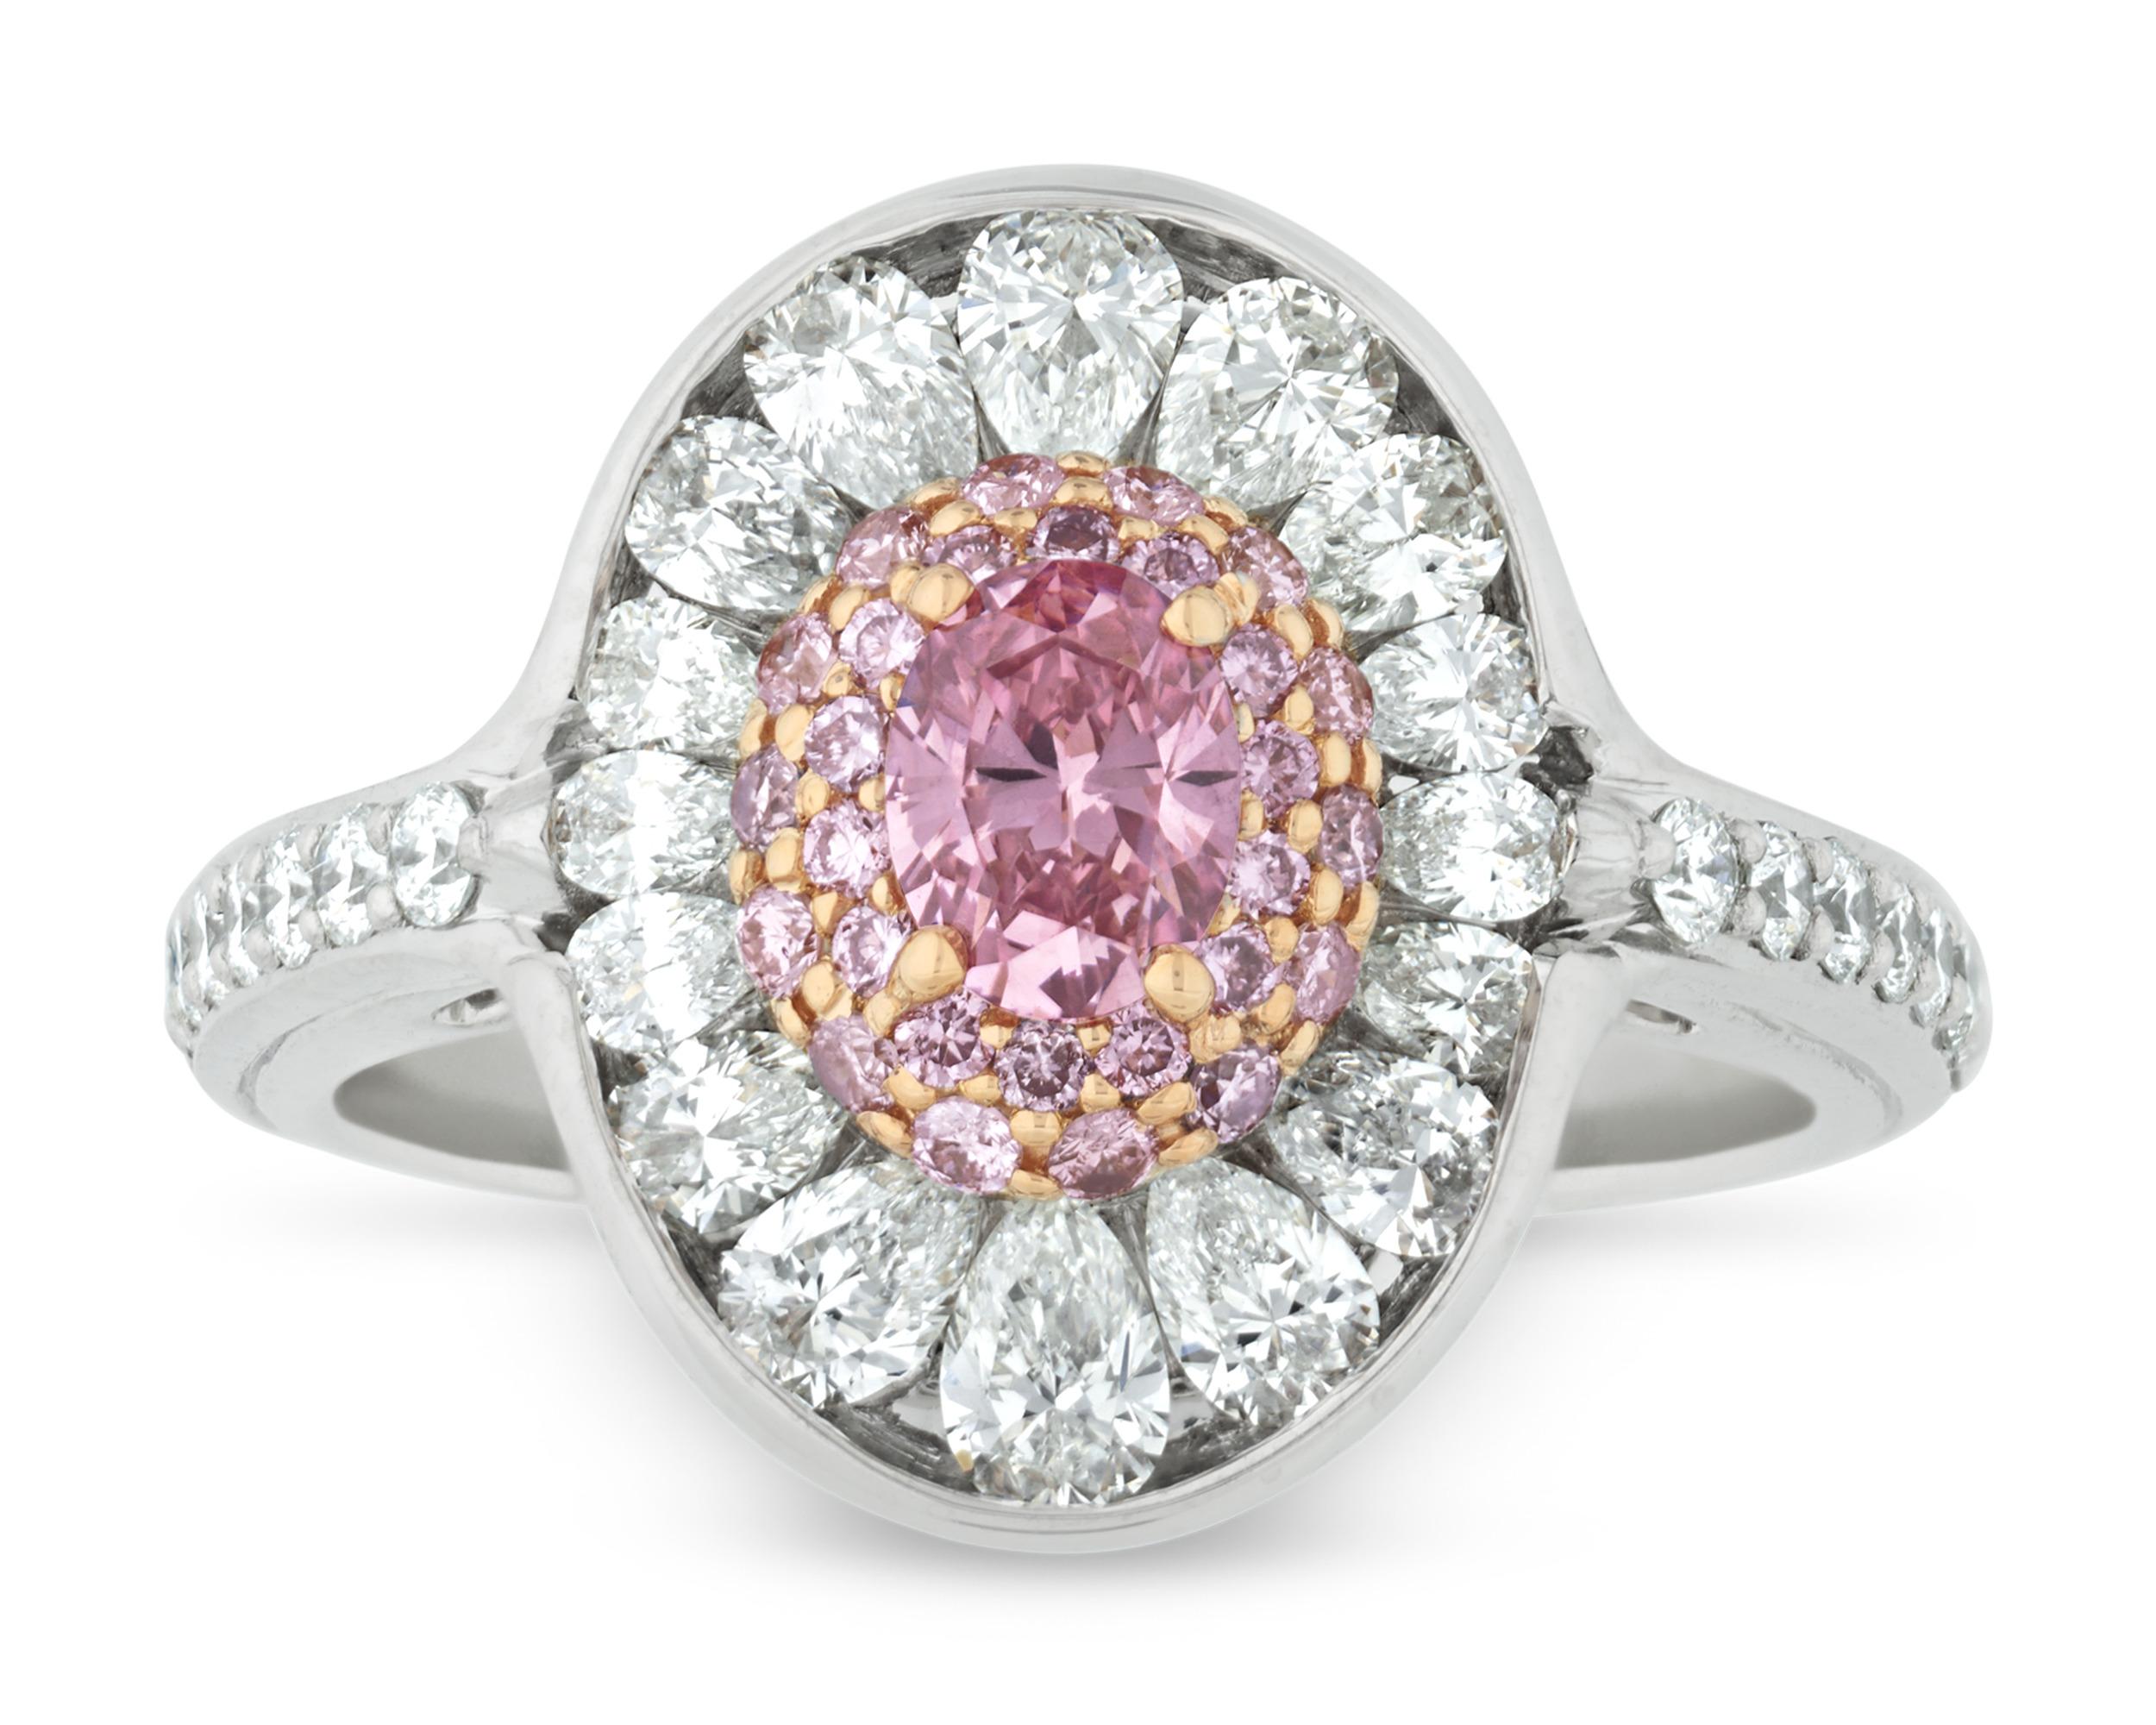 Brilliant Cut Fancy Vivid Pink And White Diamond Ring For Sale